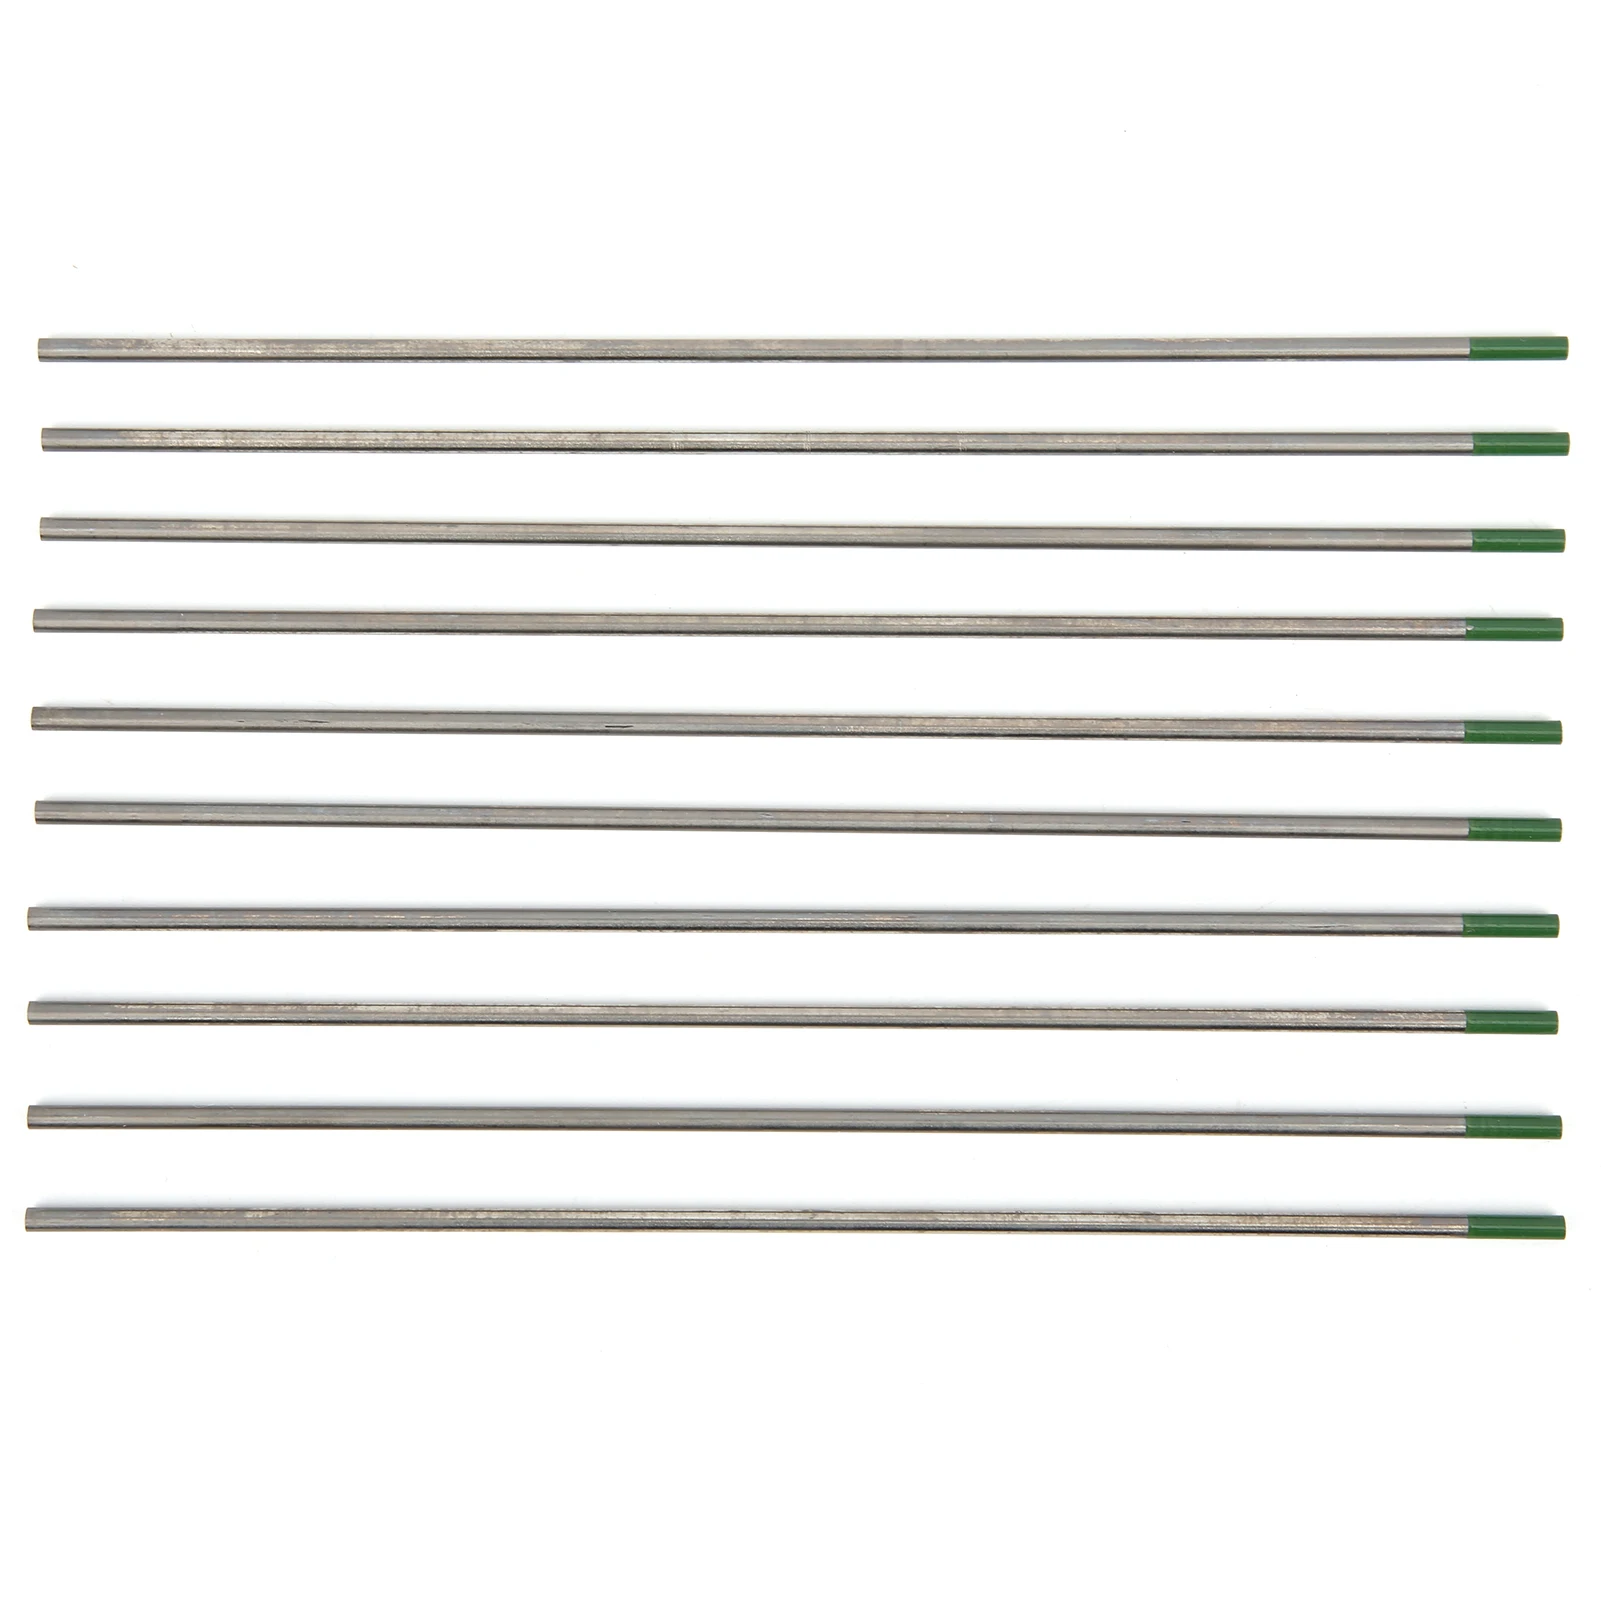 

10Pcs TIG Tungsten Electrode WP Green Tip Needles Welding Accessories 2.4 x 150mm wp wp